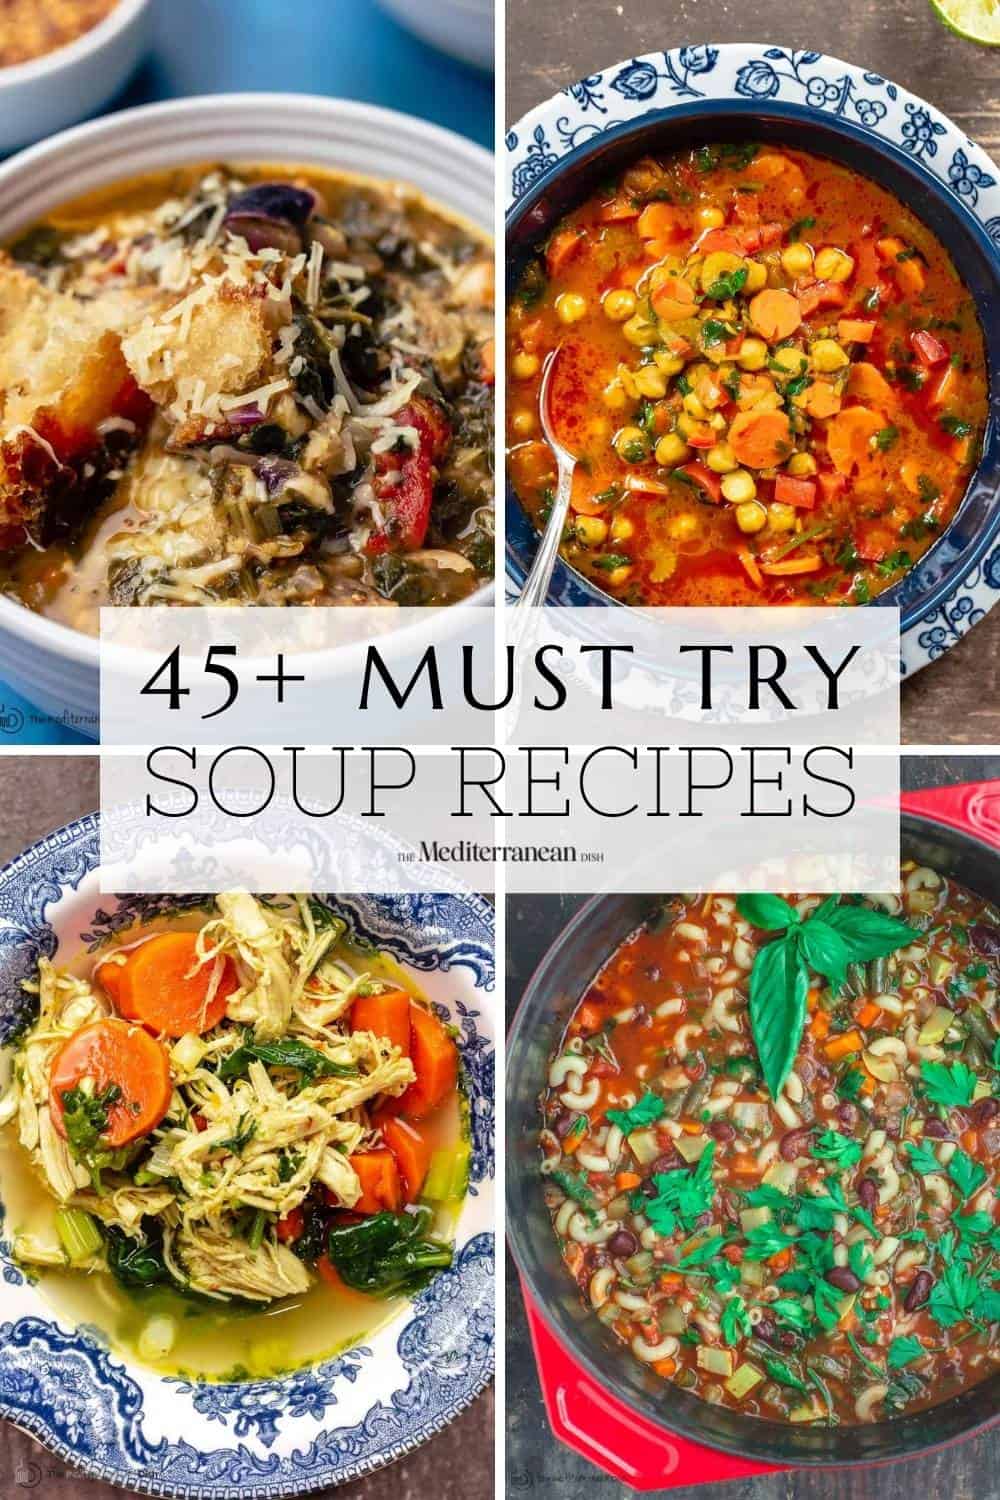 image for soup recipes roundup with a collage of 4 images.